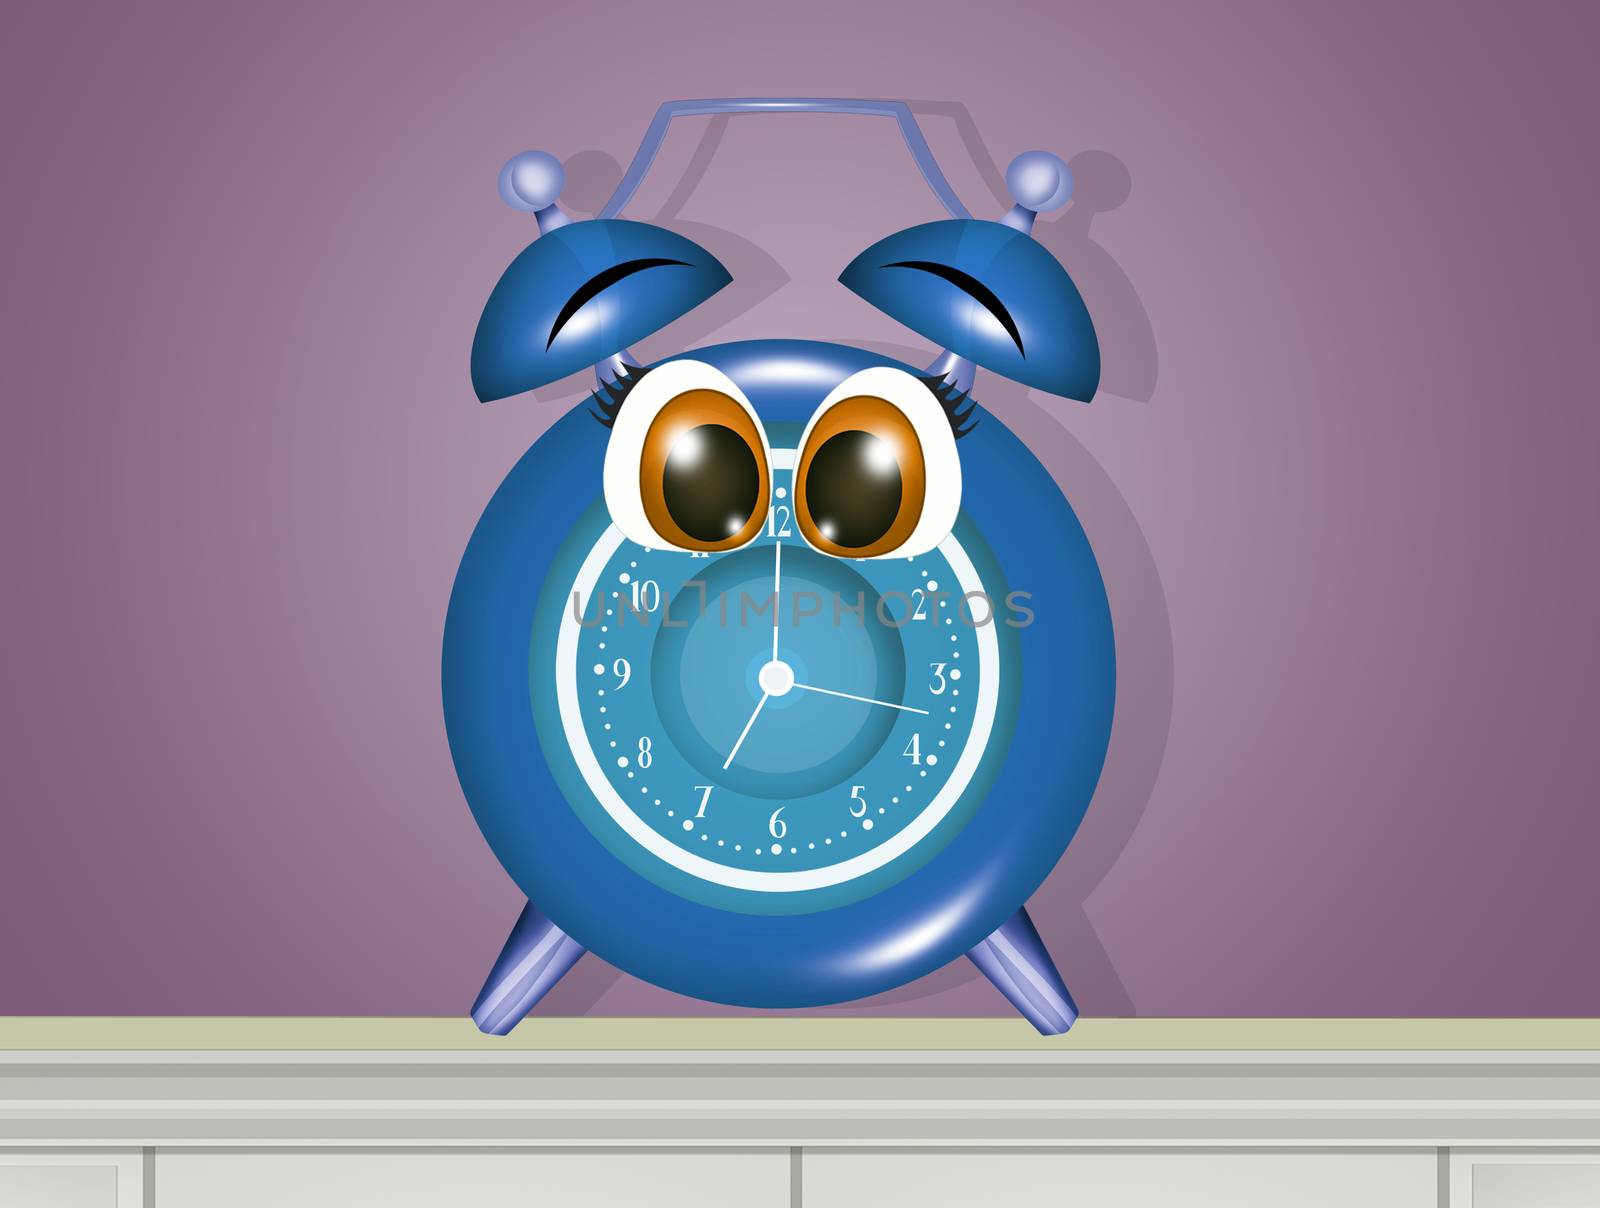 illustration of alarm clock with funny face